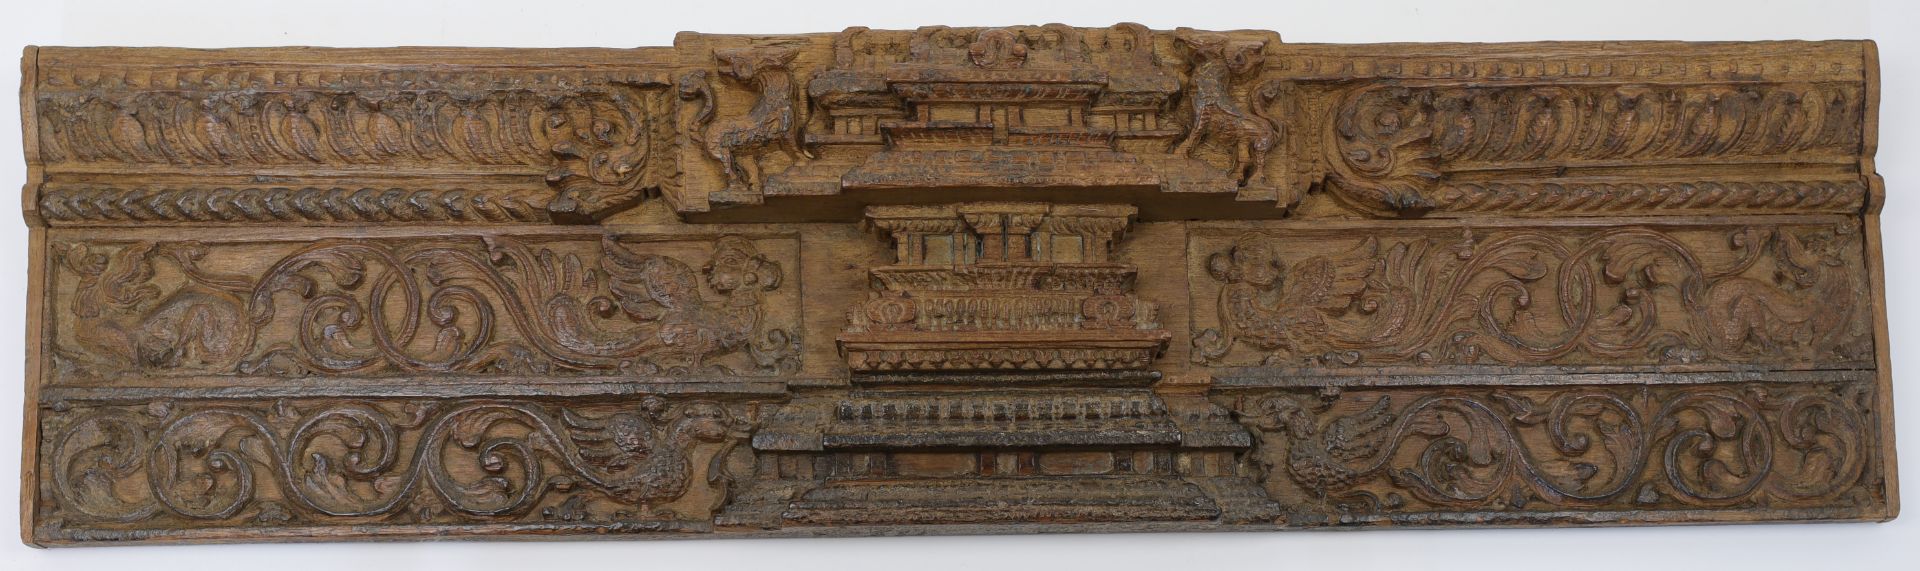 A carved relief wood panel in the South East Asian style, 20th century, with architectural featur...